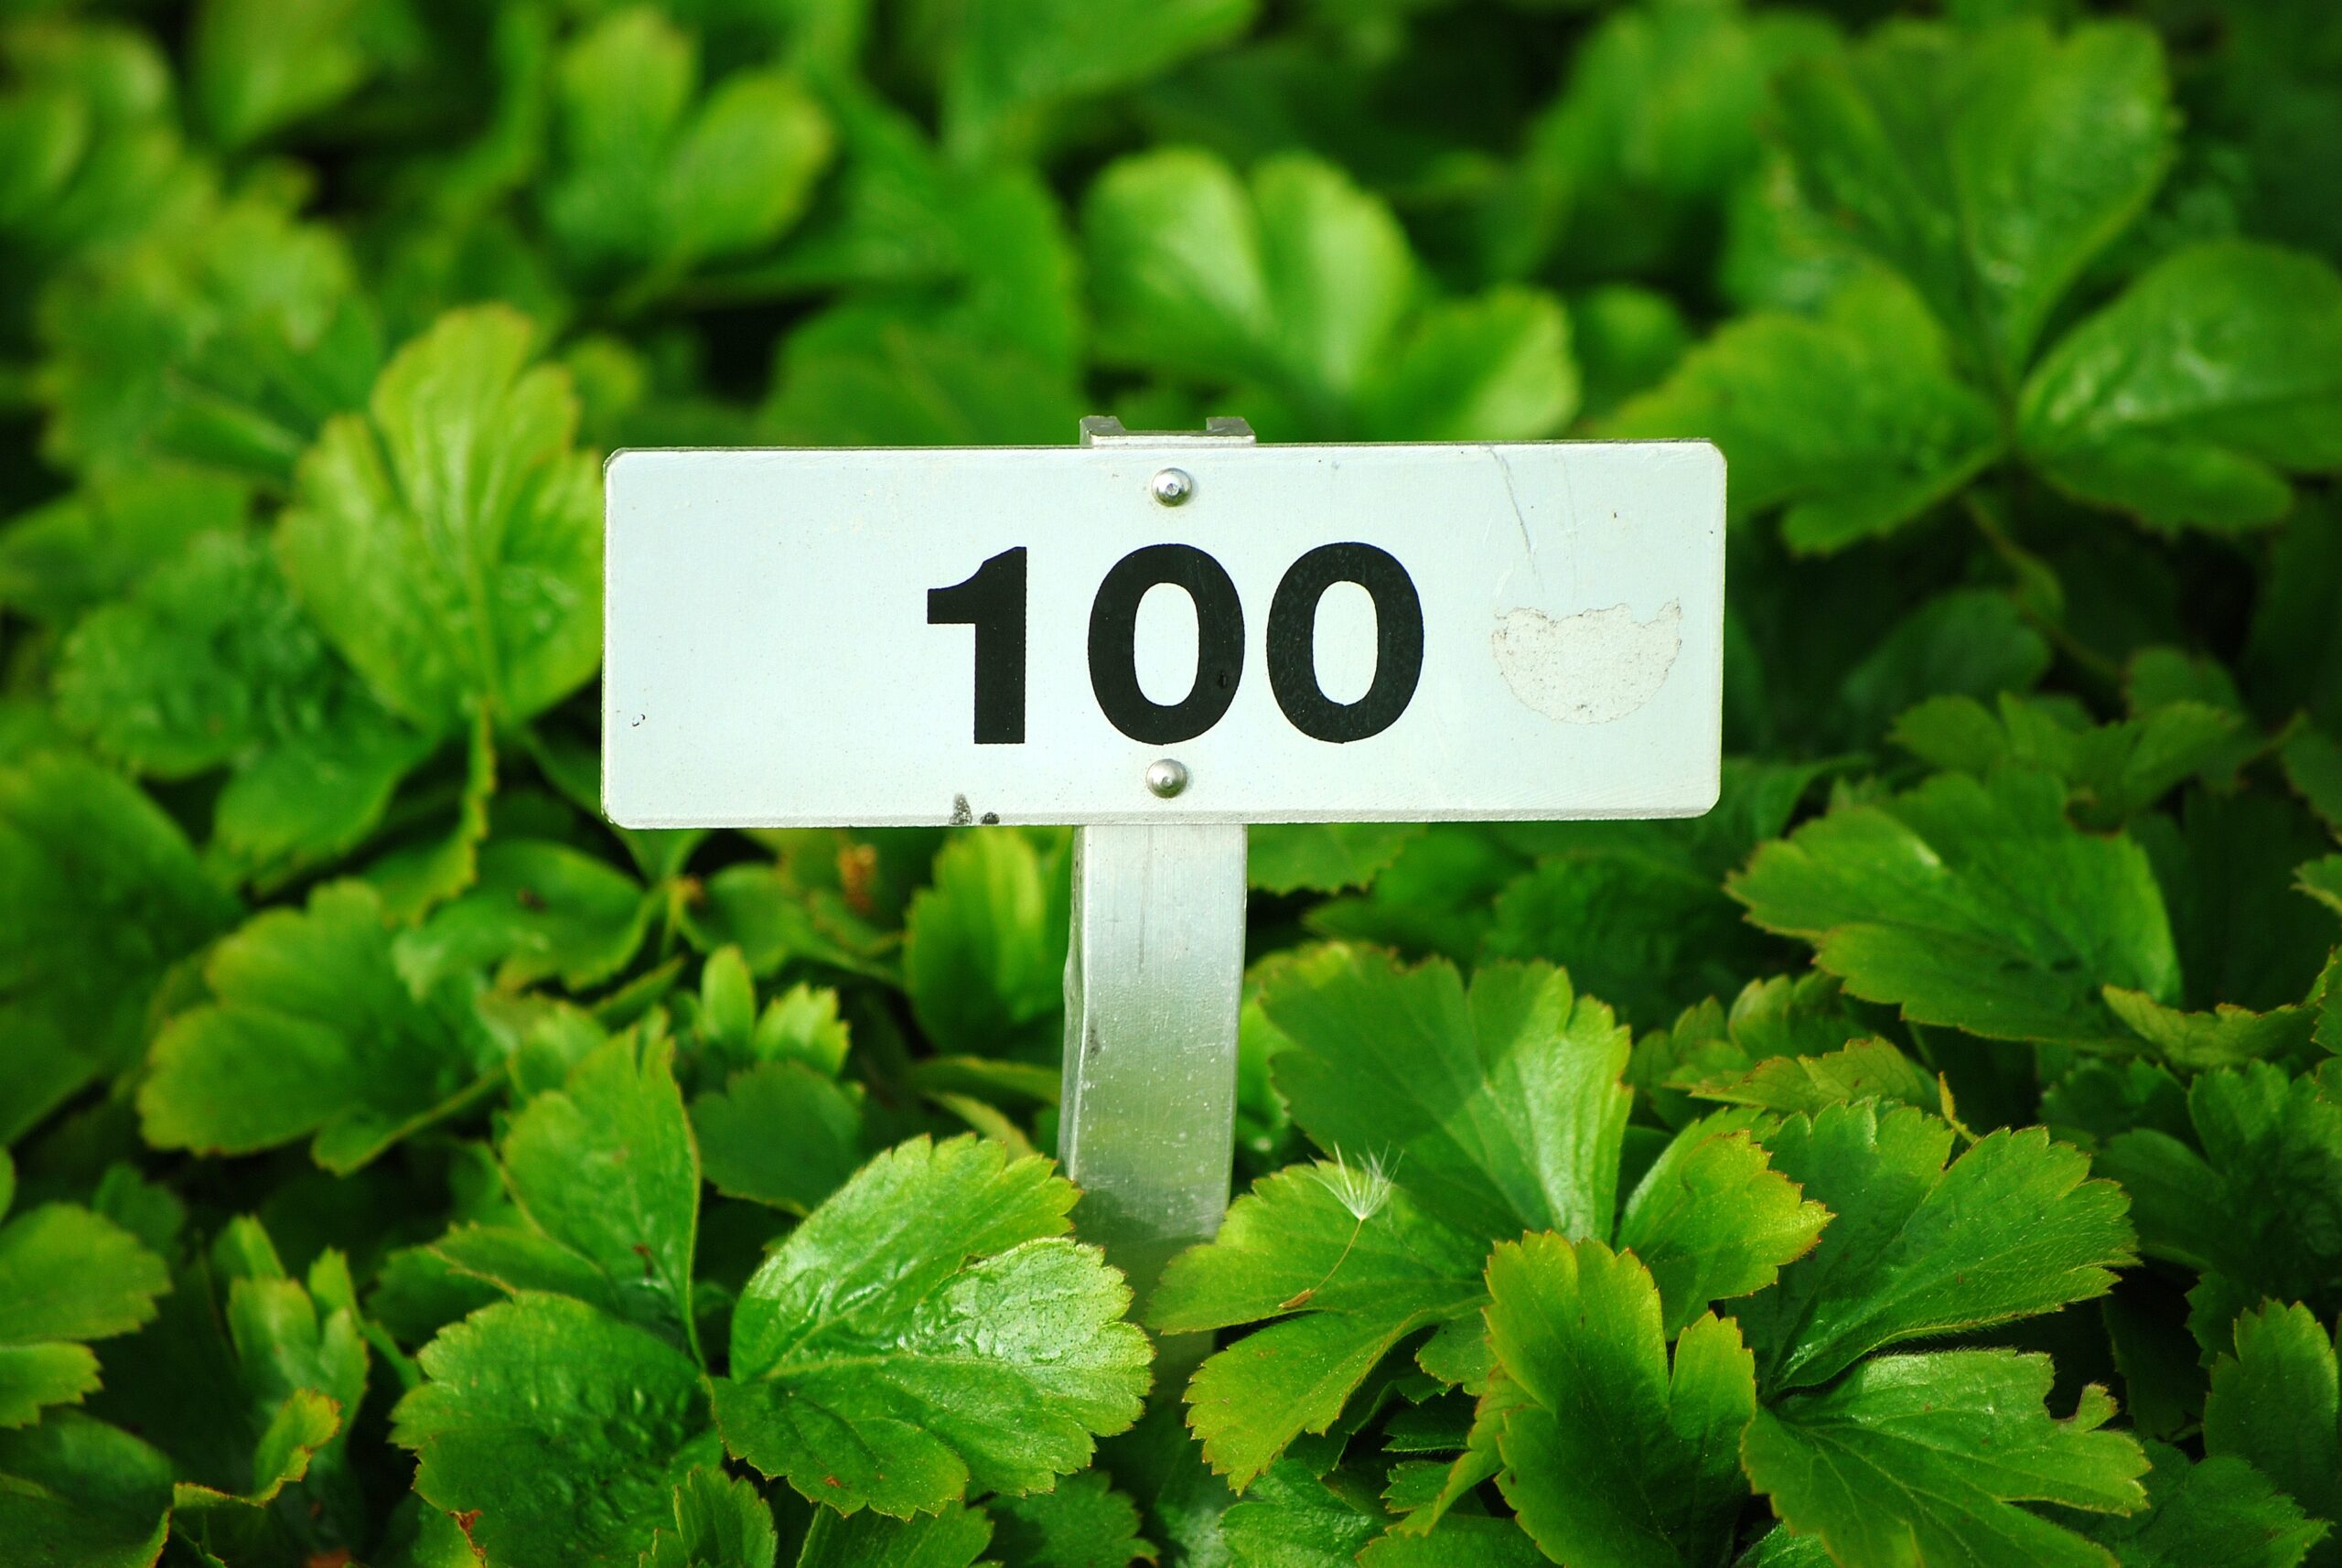 A field of plants with a shield and the number 100. Photo by Marcel Eberle on Unsplash